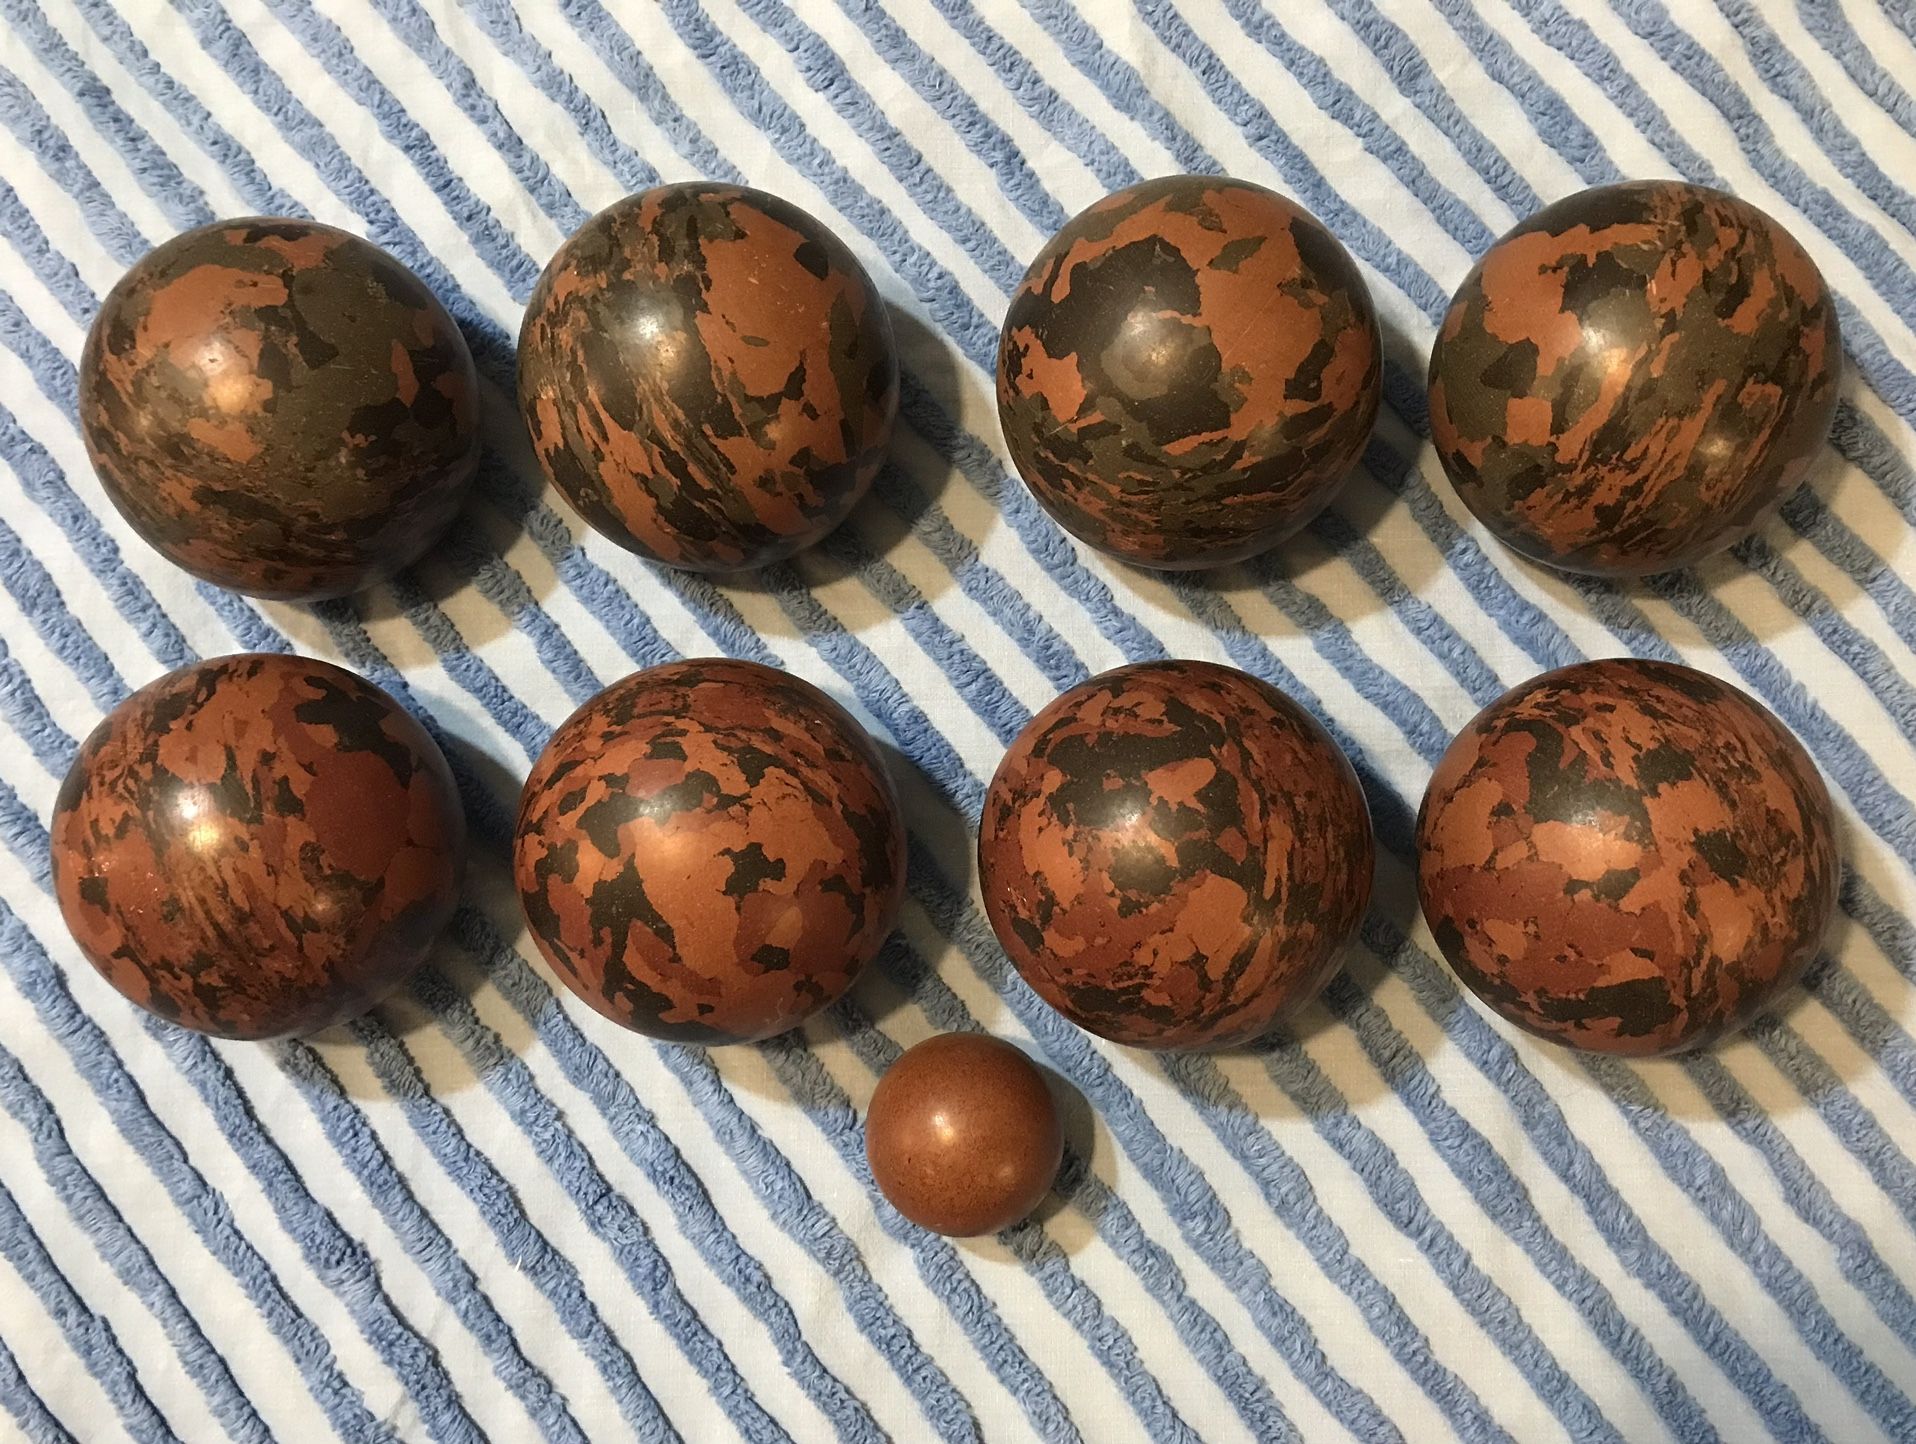 Vintage Authentic Italian Marbled Wood Bocce Ball Set (a rare find)